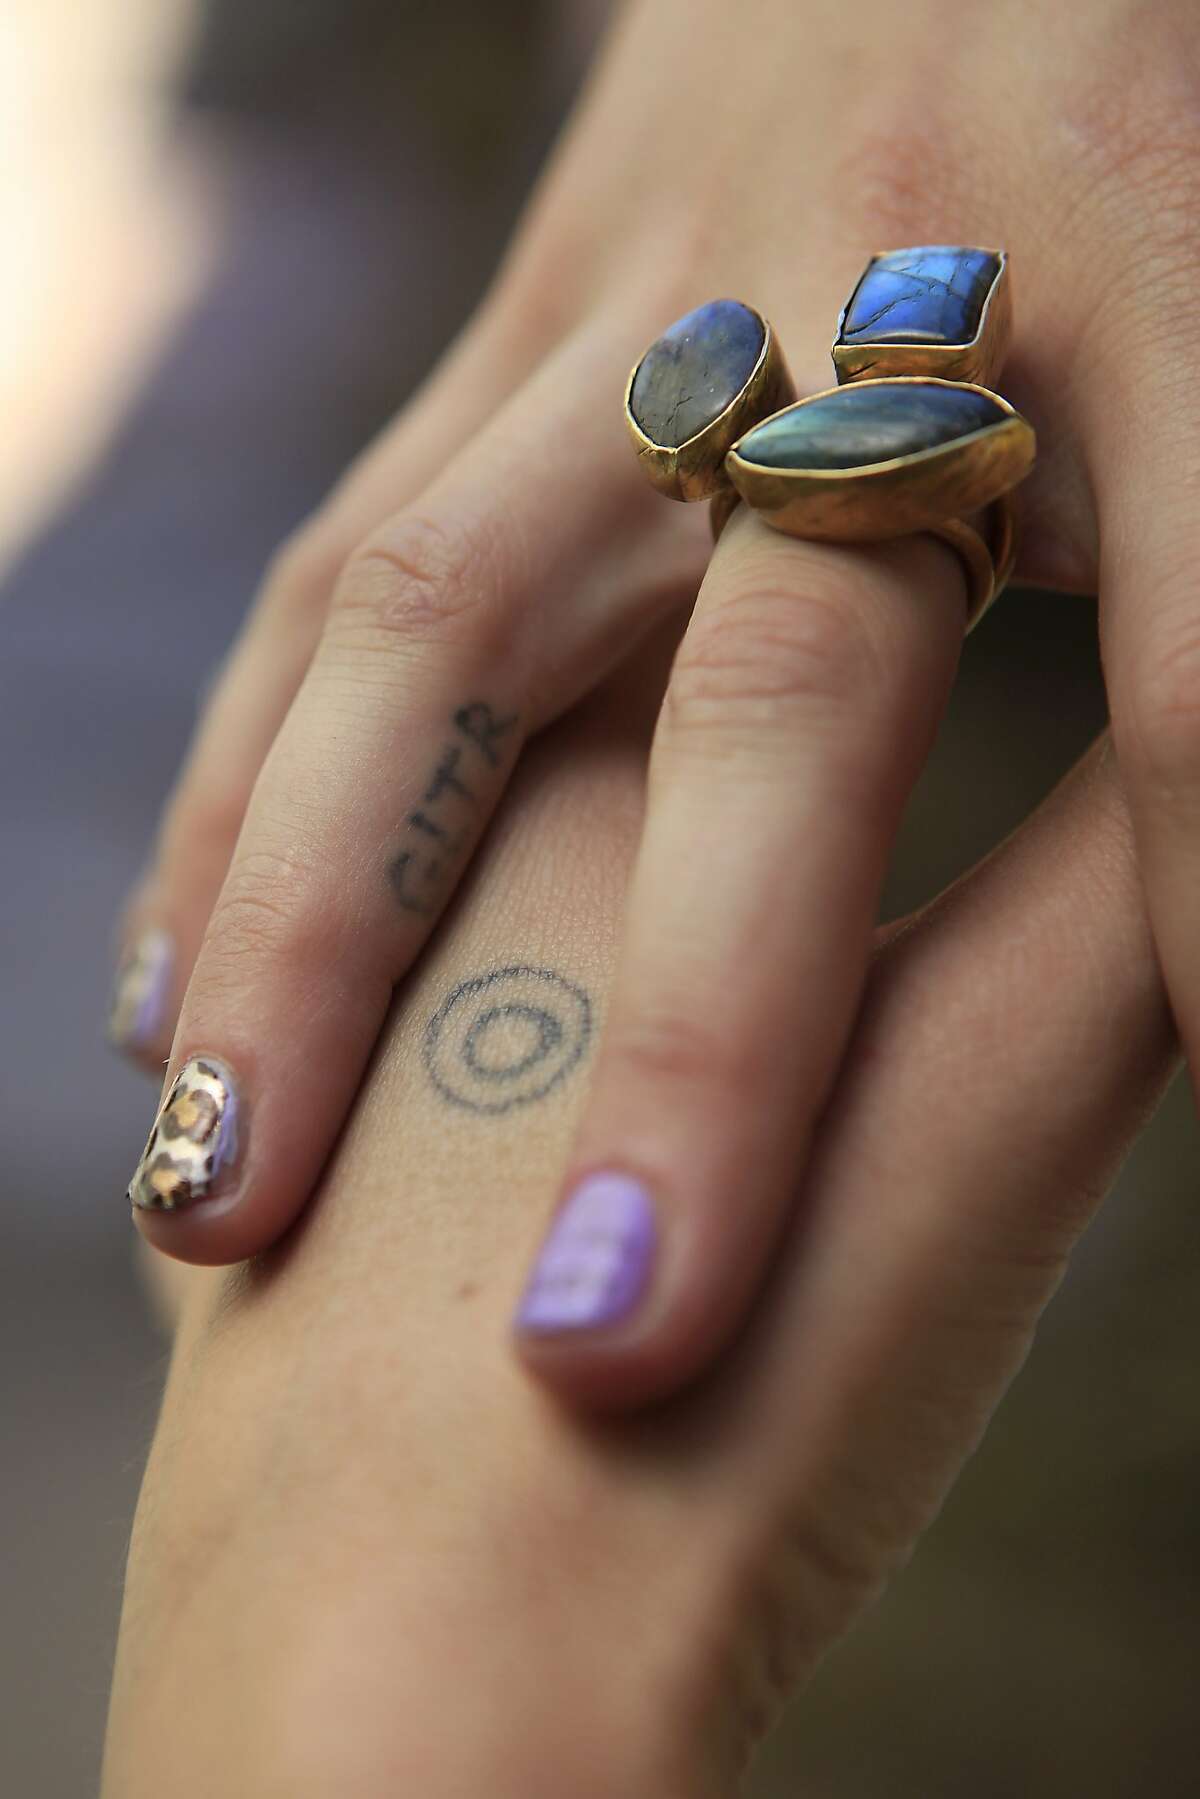 Hanna Cohen, friend of Stick & Poke creator Nicole West, shows her stick and poke tattoos on her hand and finger, at her home in San Francisco, CA, Saturday, August 30, 2014.